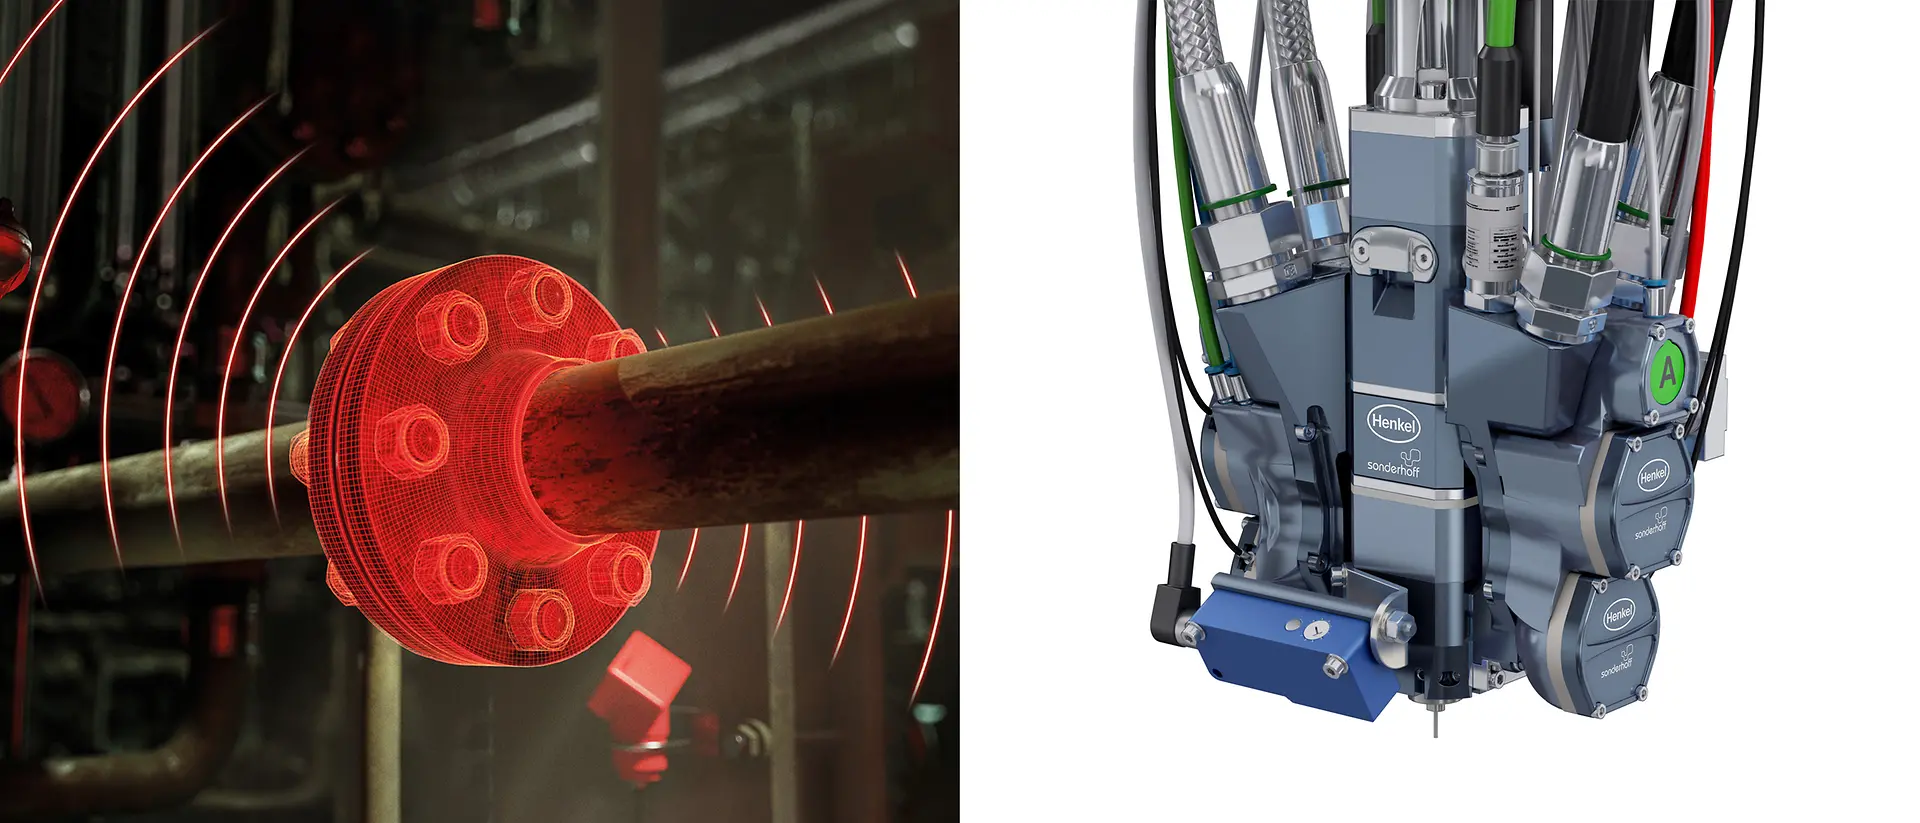 A pipe leckage is monitored remotely digitally by the LOCTITE Pulse Smart Flange solution, shown in red.